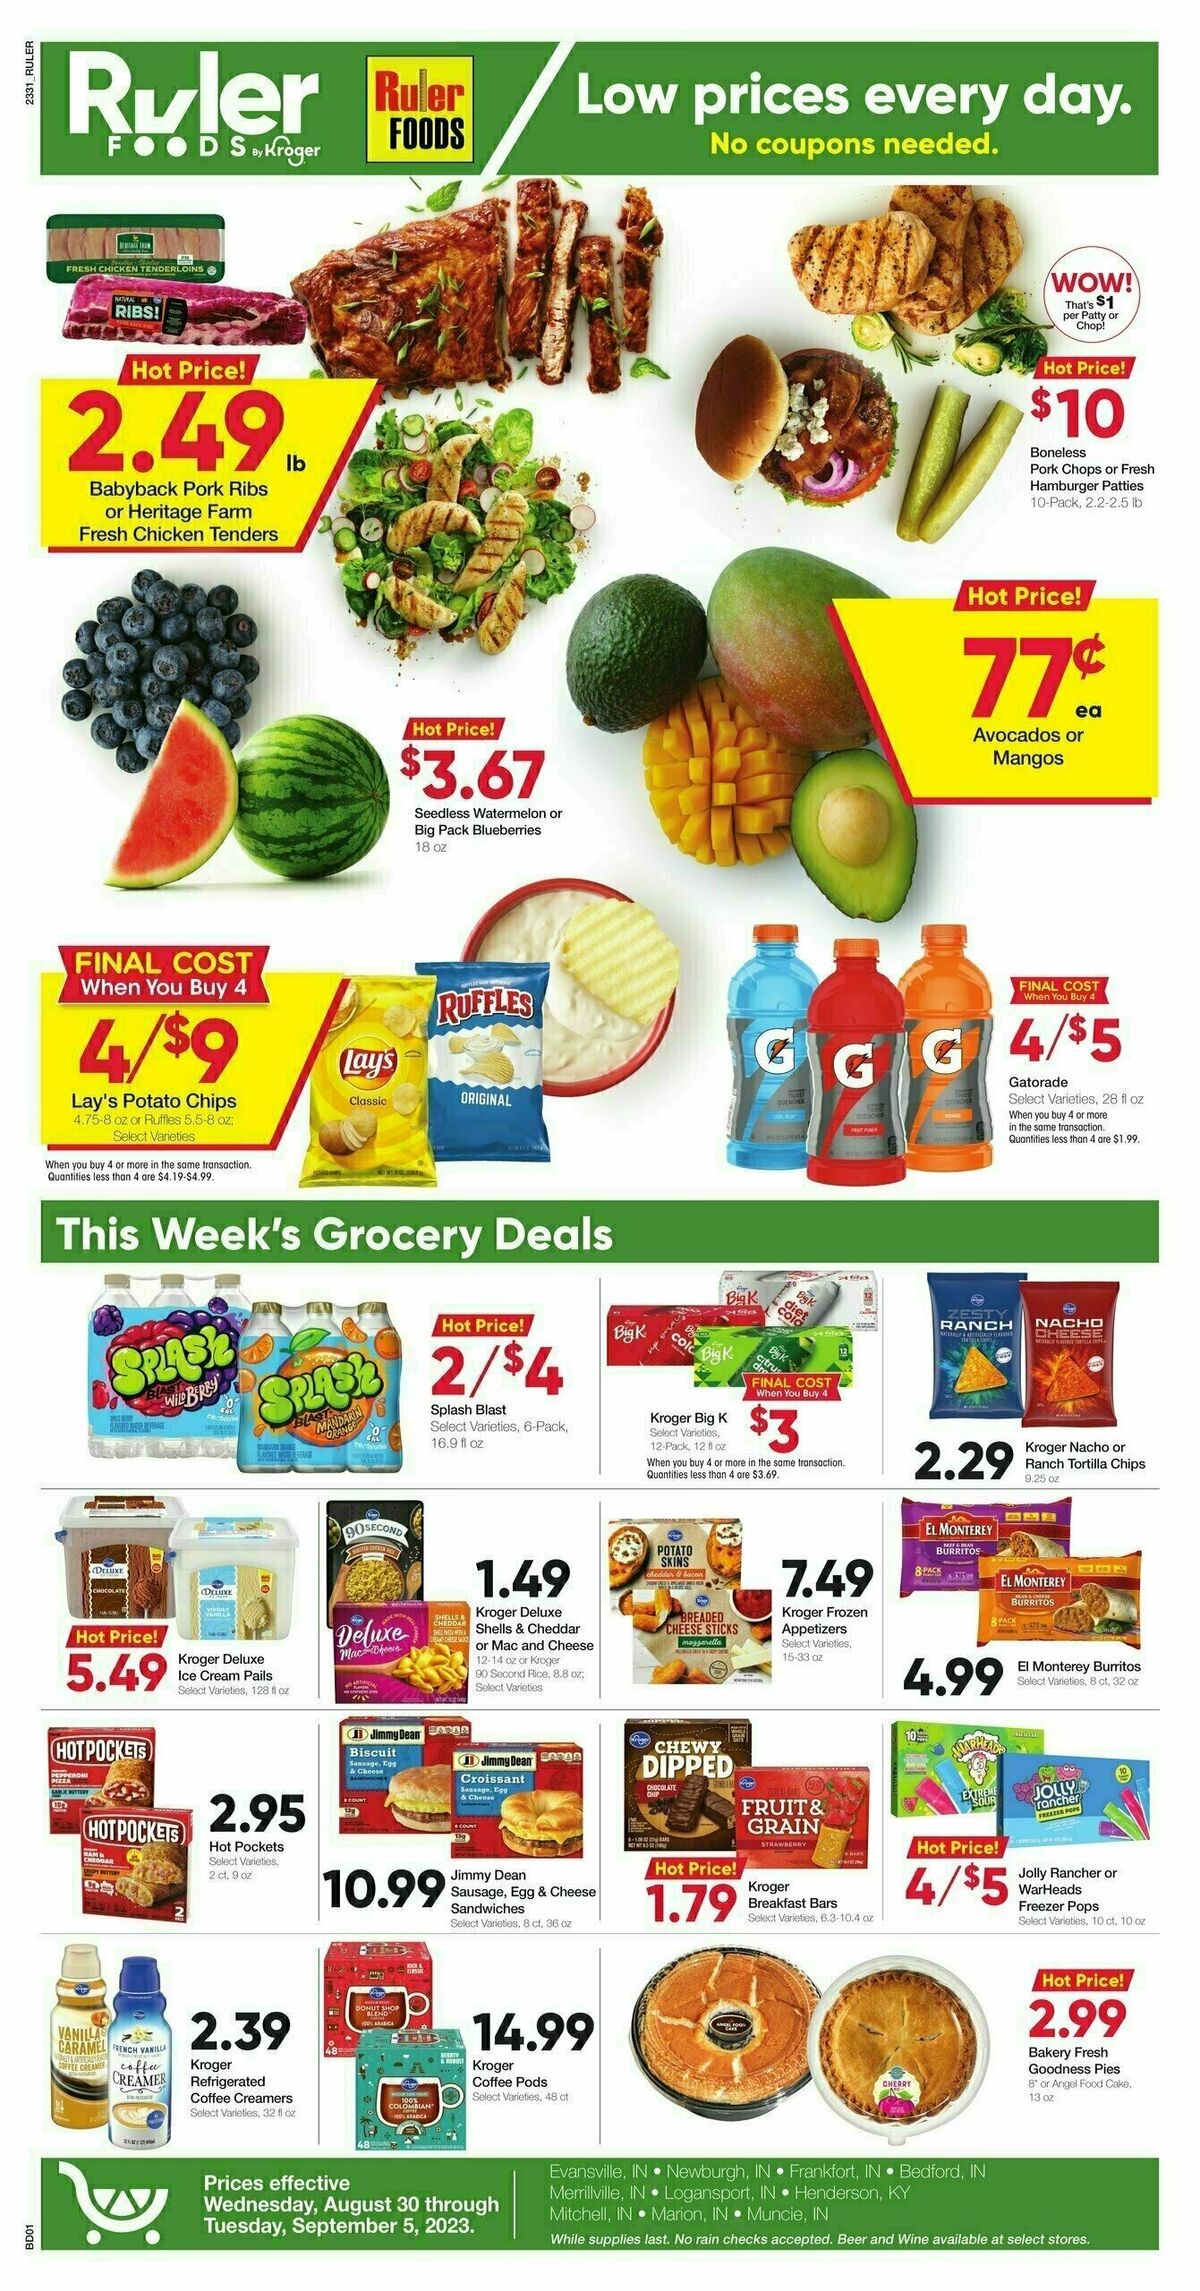 Ruler Foods Weekly Ad from August 30